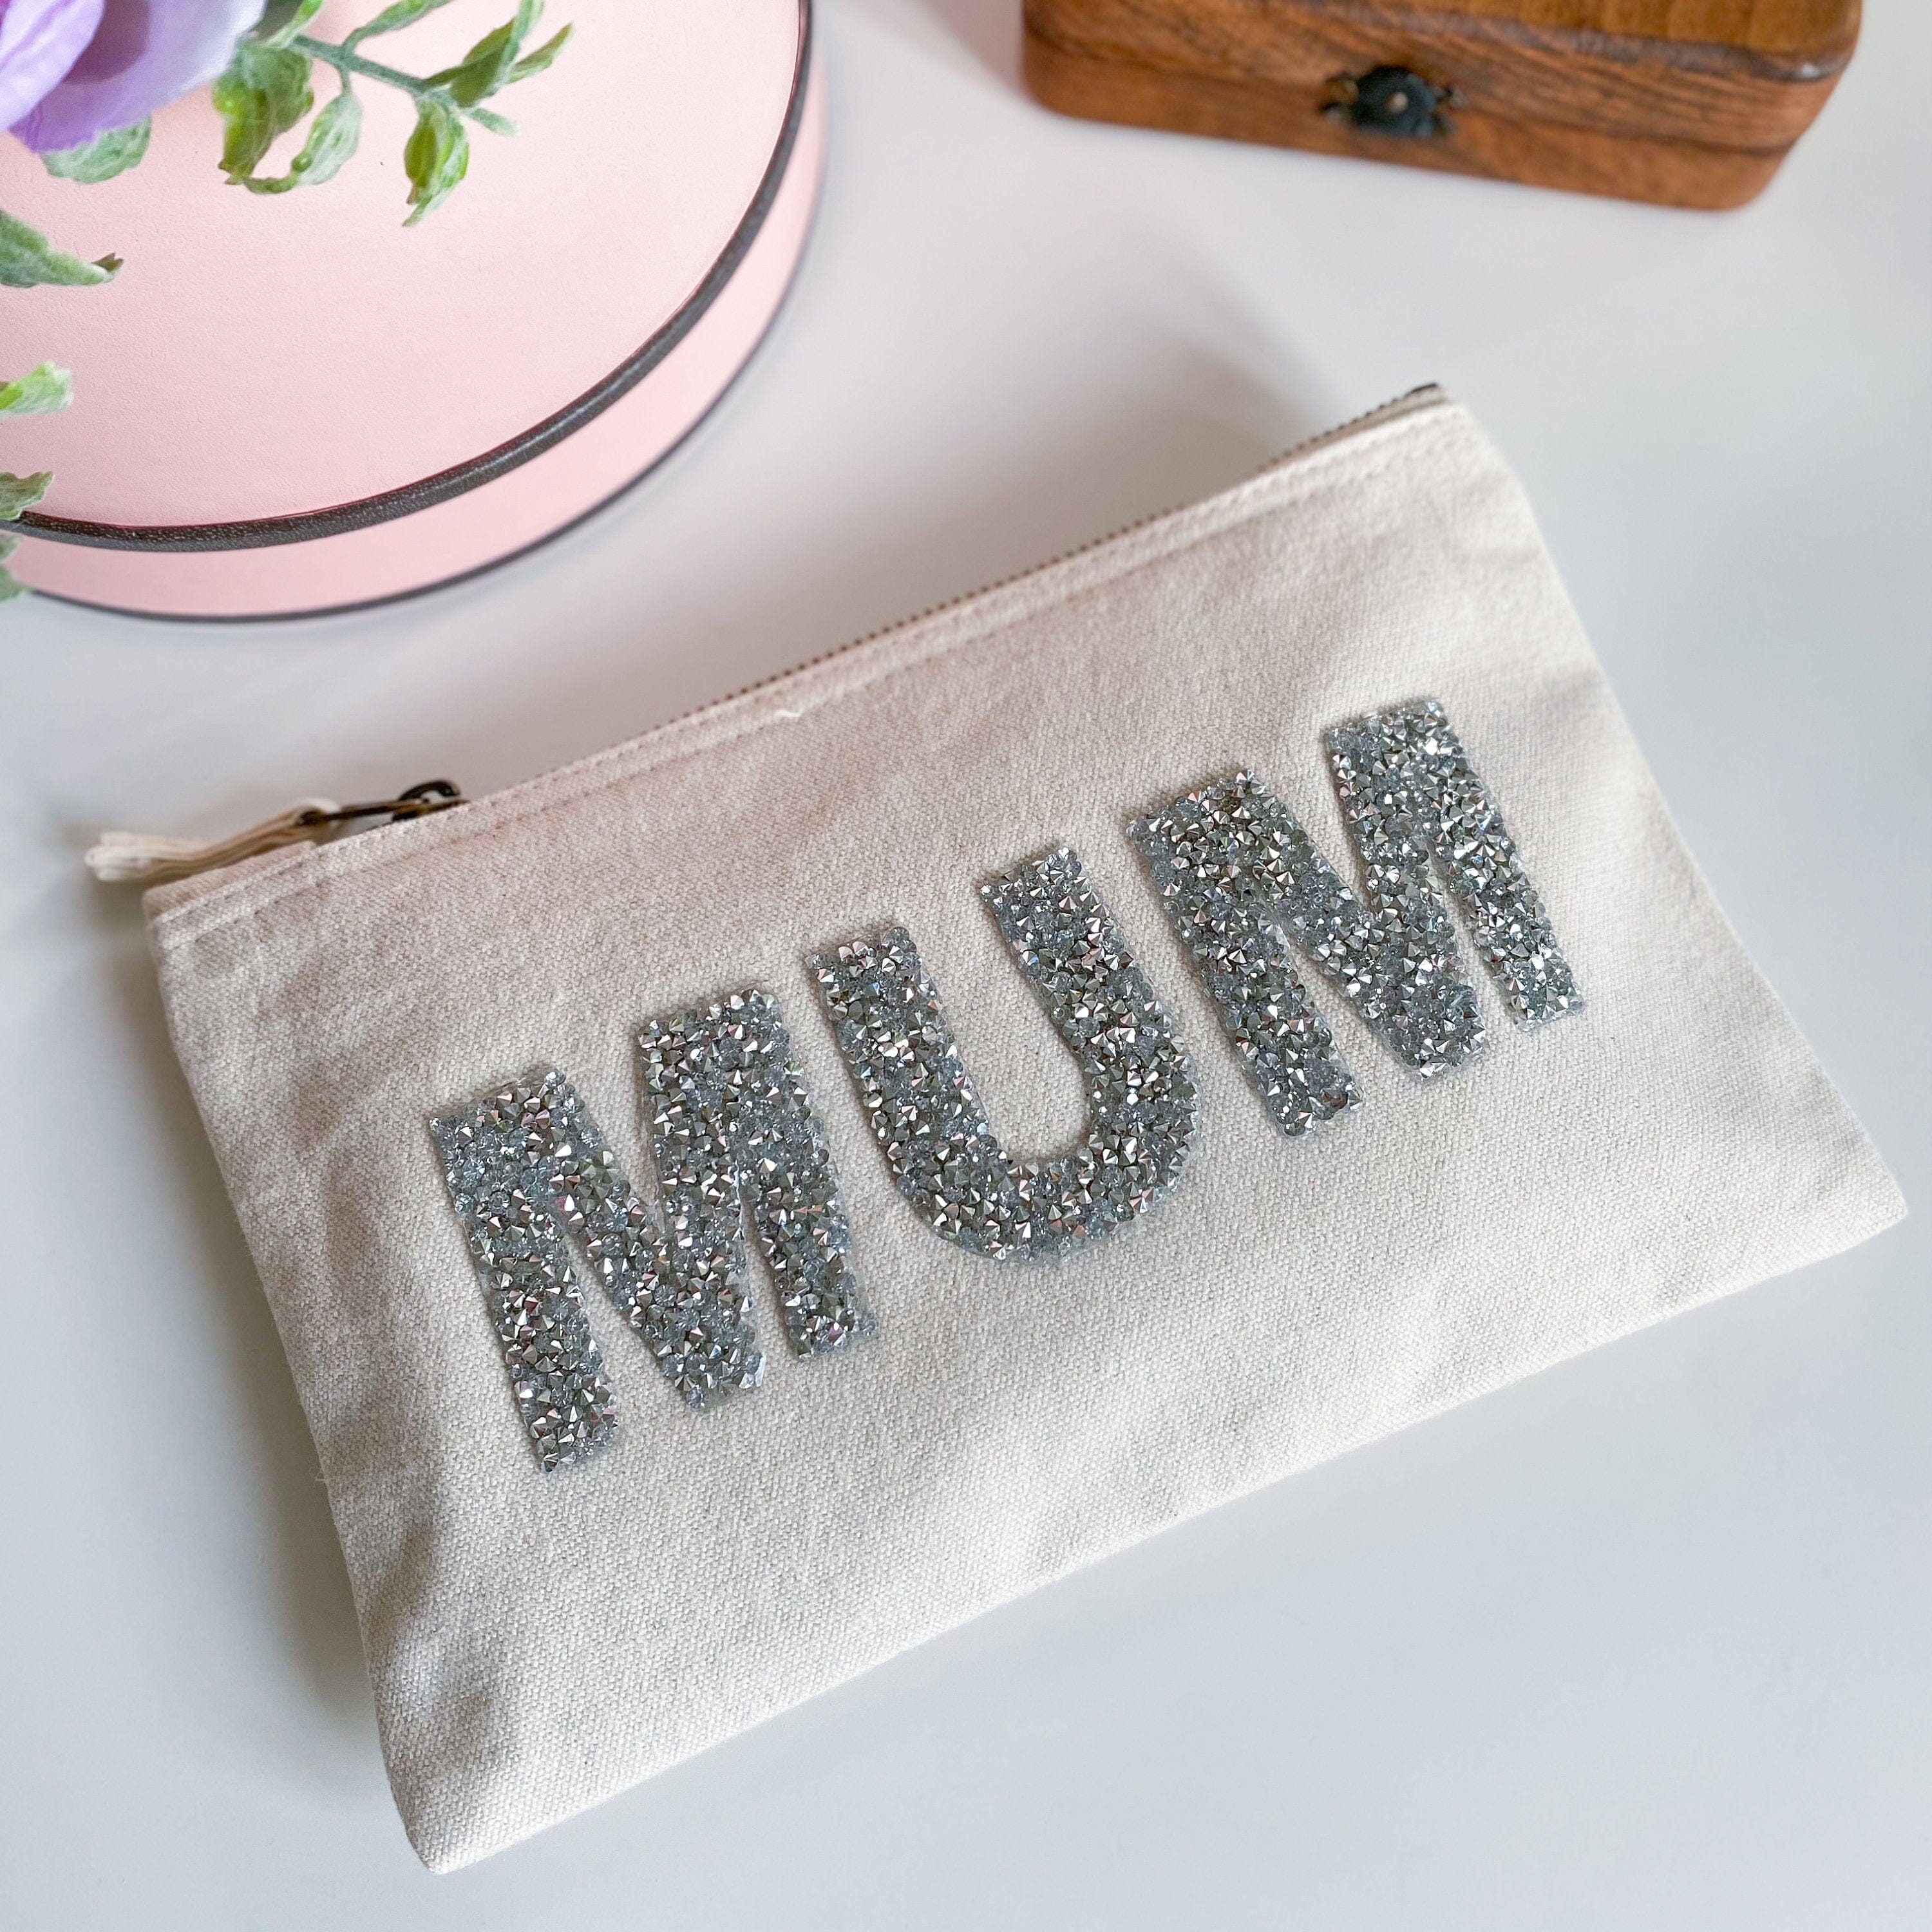 Rhinestone Letter mum makeup bag, Fairtrade Cotton Canvas, Mother's Day Birthday Christmas